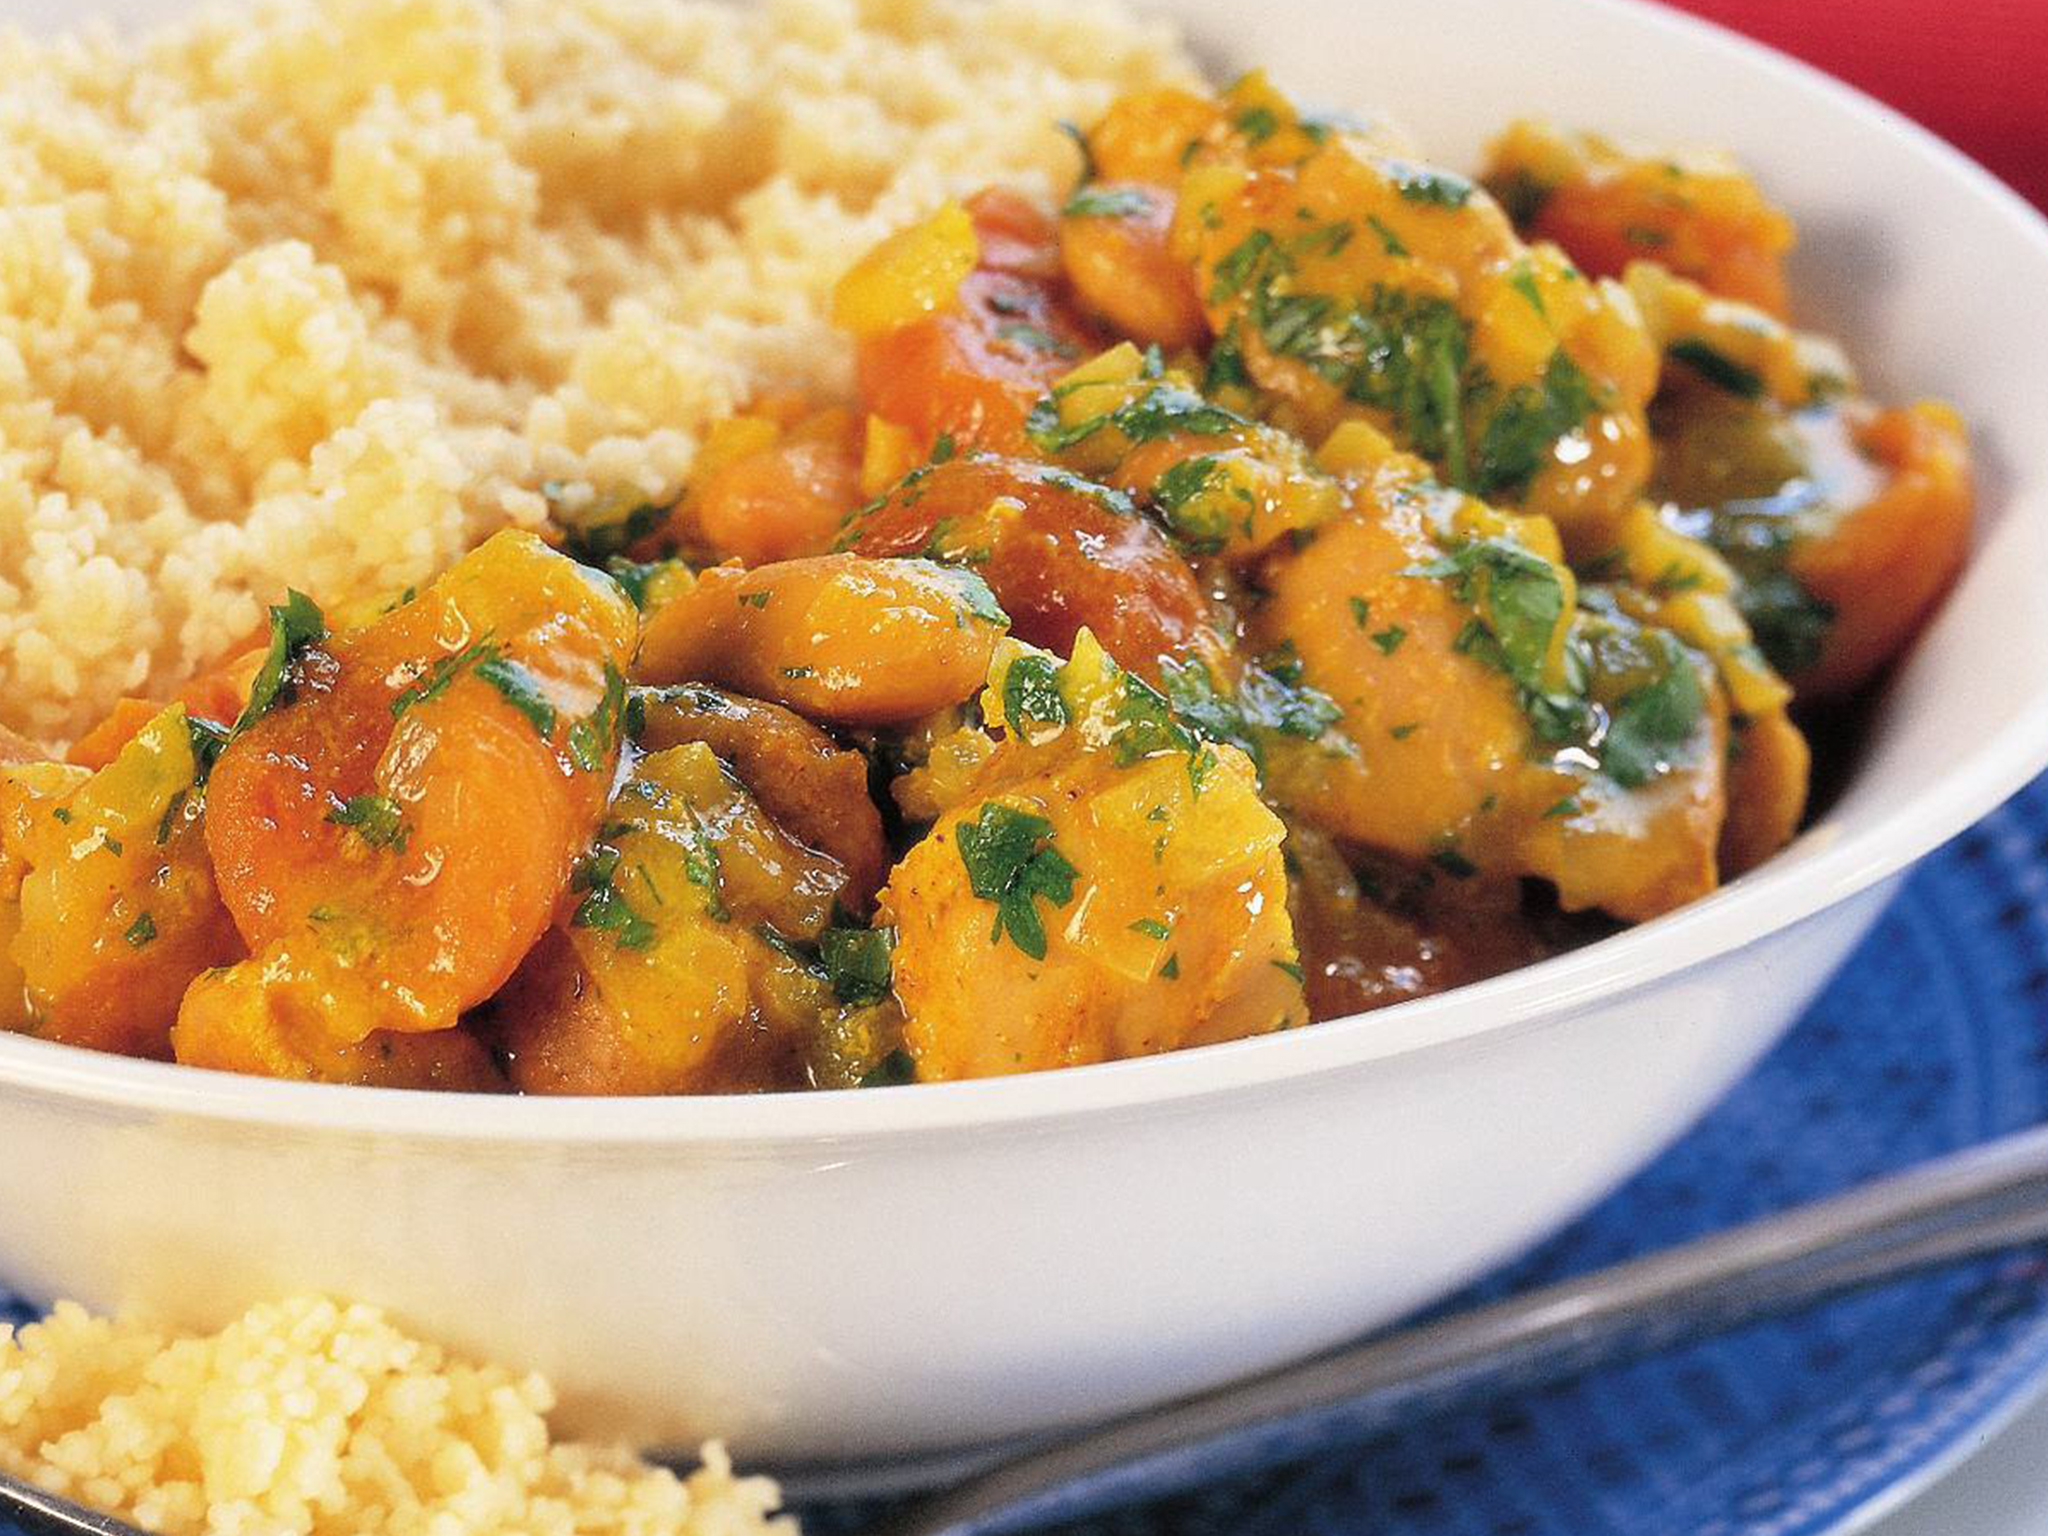 Spiced apricot and chicken tagine